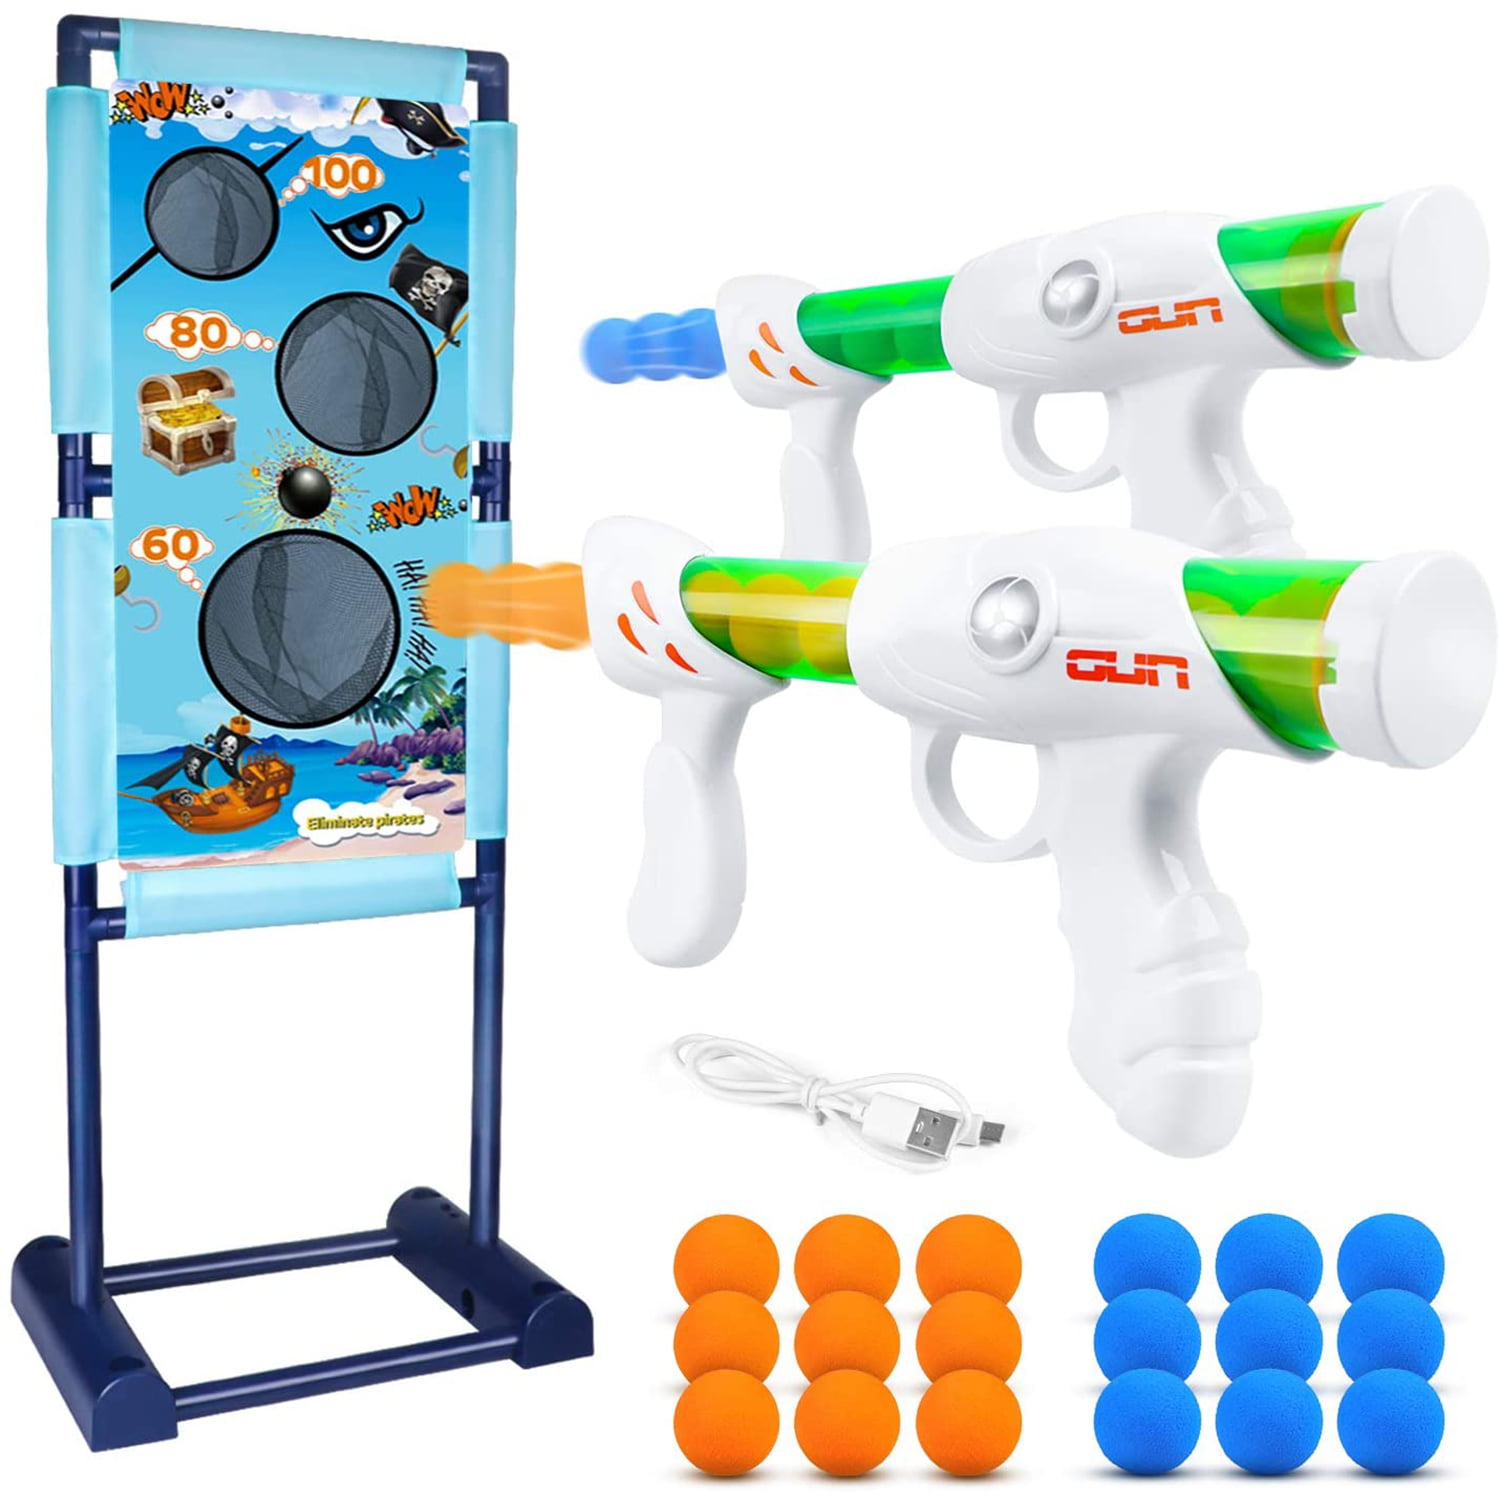 and Shooting Target Christmas Gifts for Boys and Girls Foam Ball Shooting Game Set with 2 Toy Guns 10 Darts Birthday 20 Foam Balls WONDER SHOOT Jumpit Shooting Game Toy for Kids Ages 6 and Up